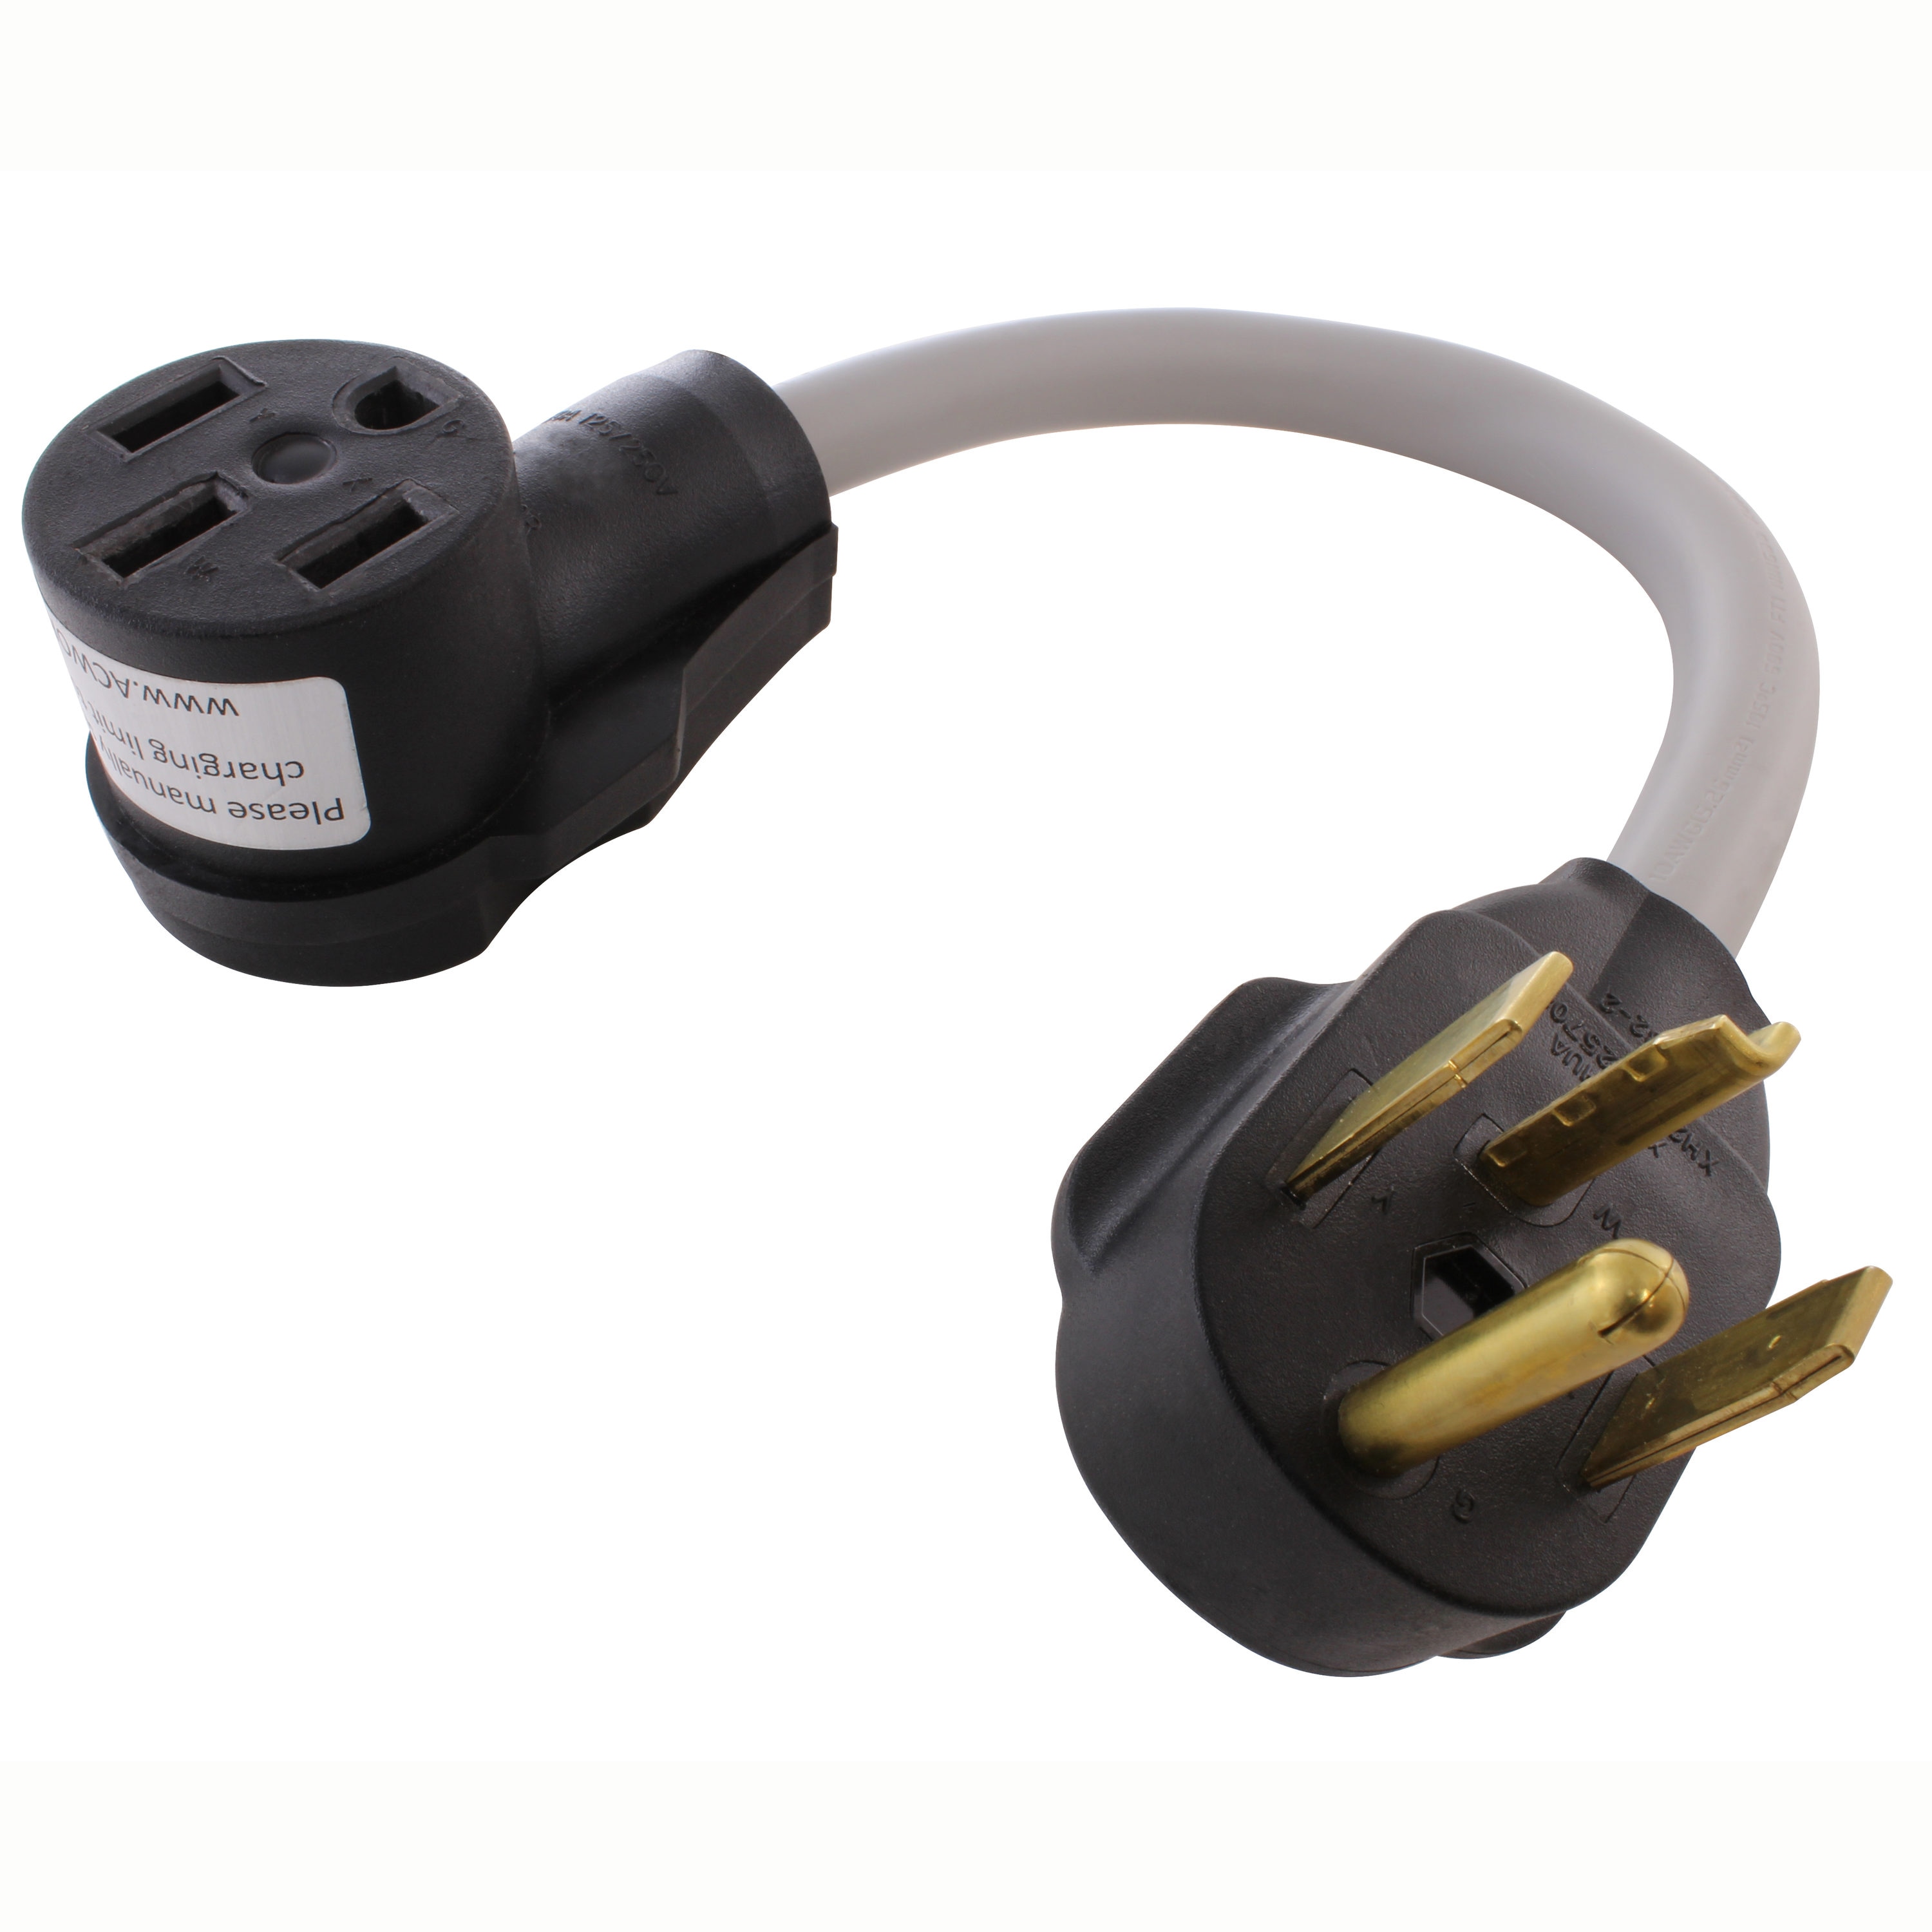 RV 50 amp shore power locking power cord, 100 ft. – EVSE Adapters